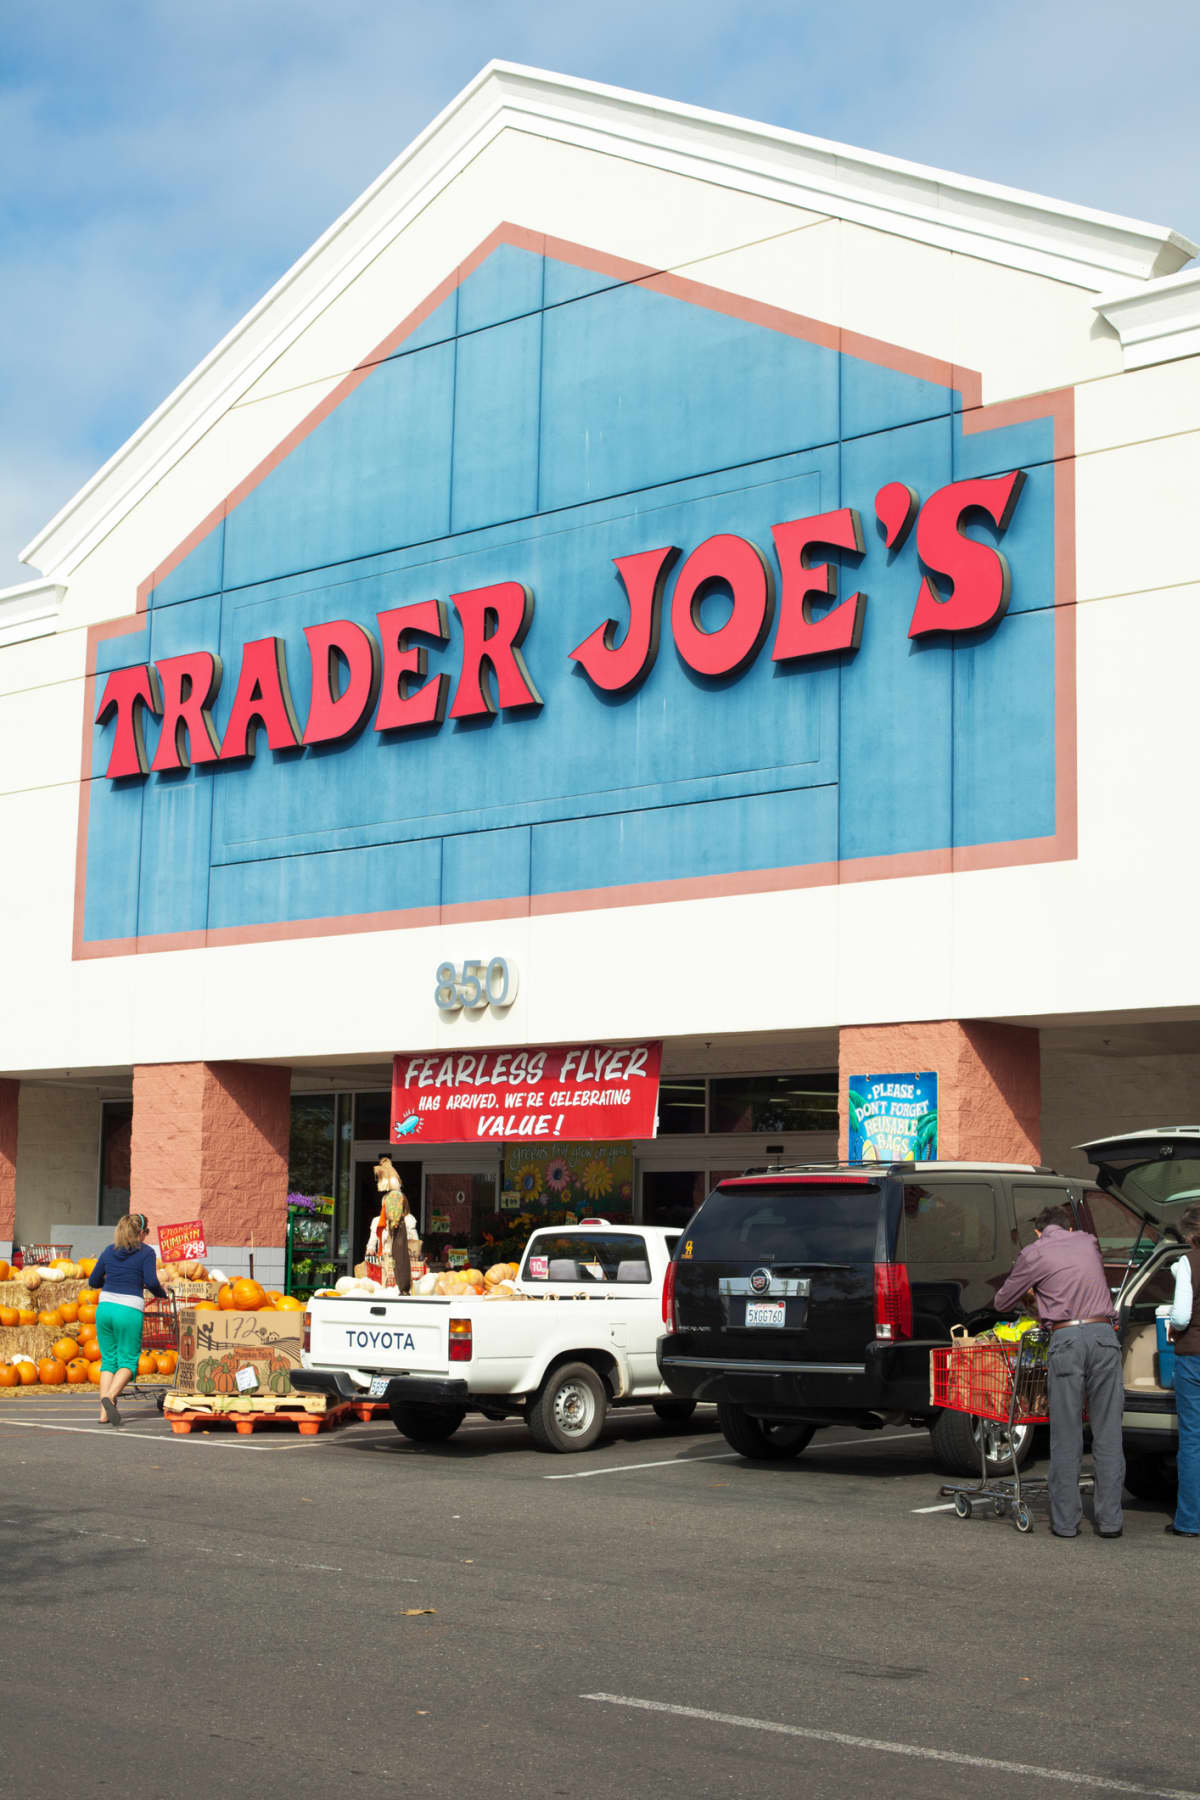 ARDMORE, PENNSYLVANIA, UNITED STATES - 2014/07/12: Exterior of Trader Joe's specialty food store. (Photo by John Greim/LightRocket via Getty Images)